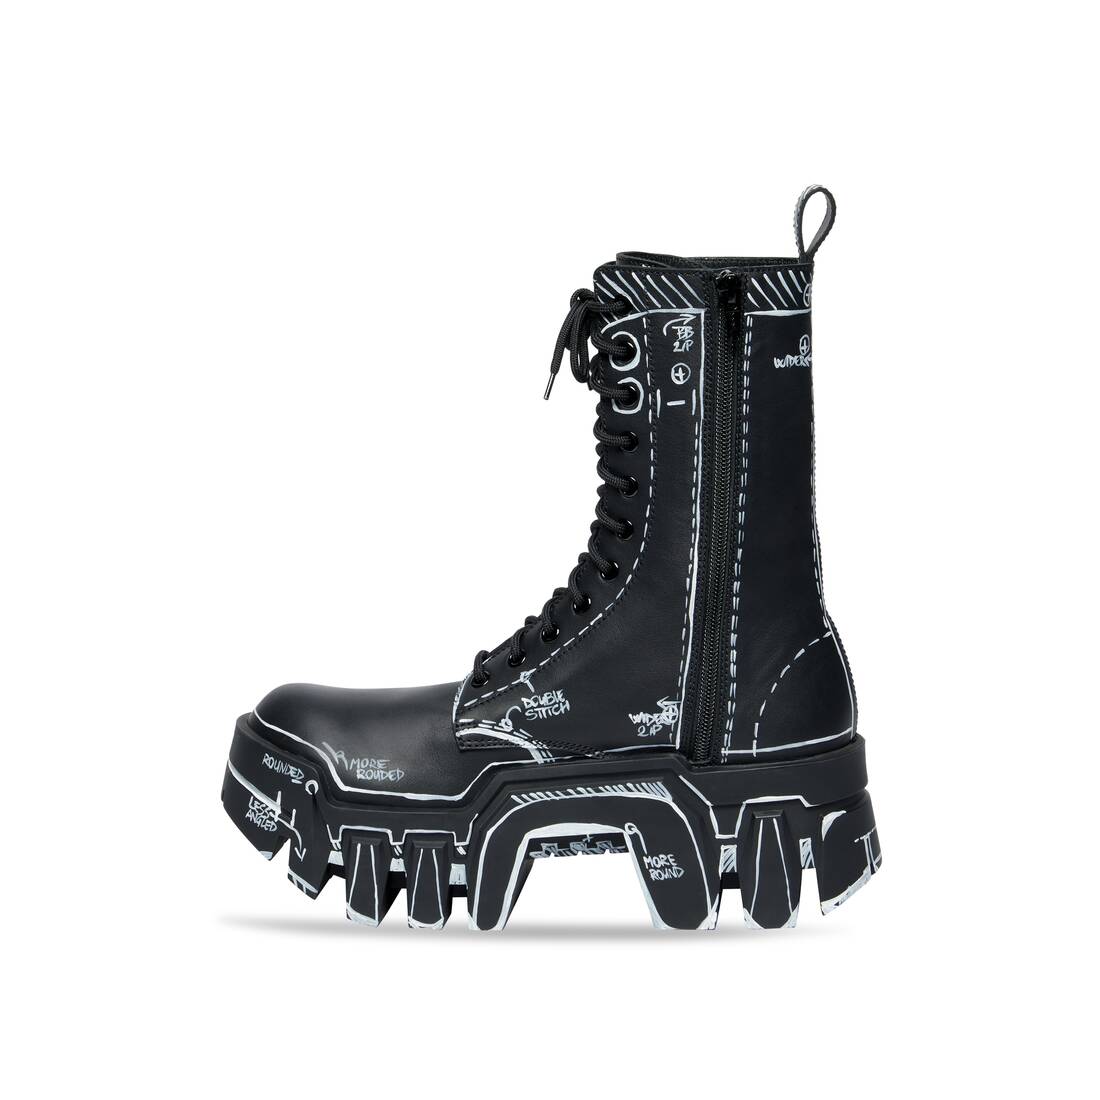 Opyum 110mm ankle boots - Balenciaga Black Bulldozer Mini Boots - One of  the newest sneaker labels in the game - Kids' shoes - Low shoes